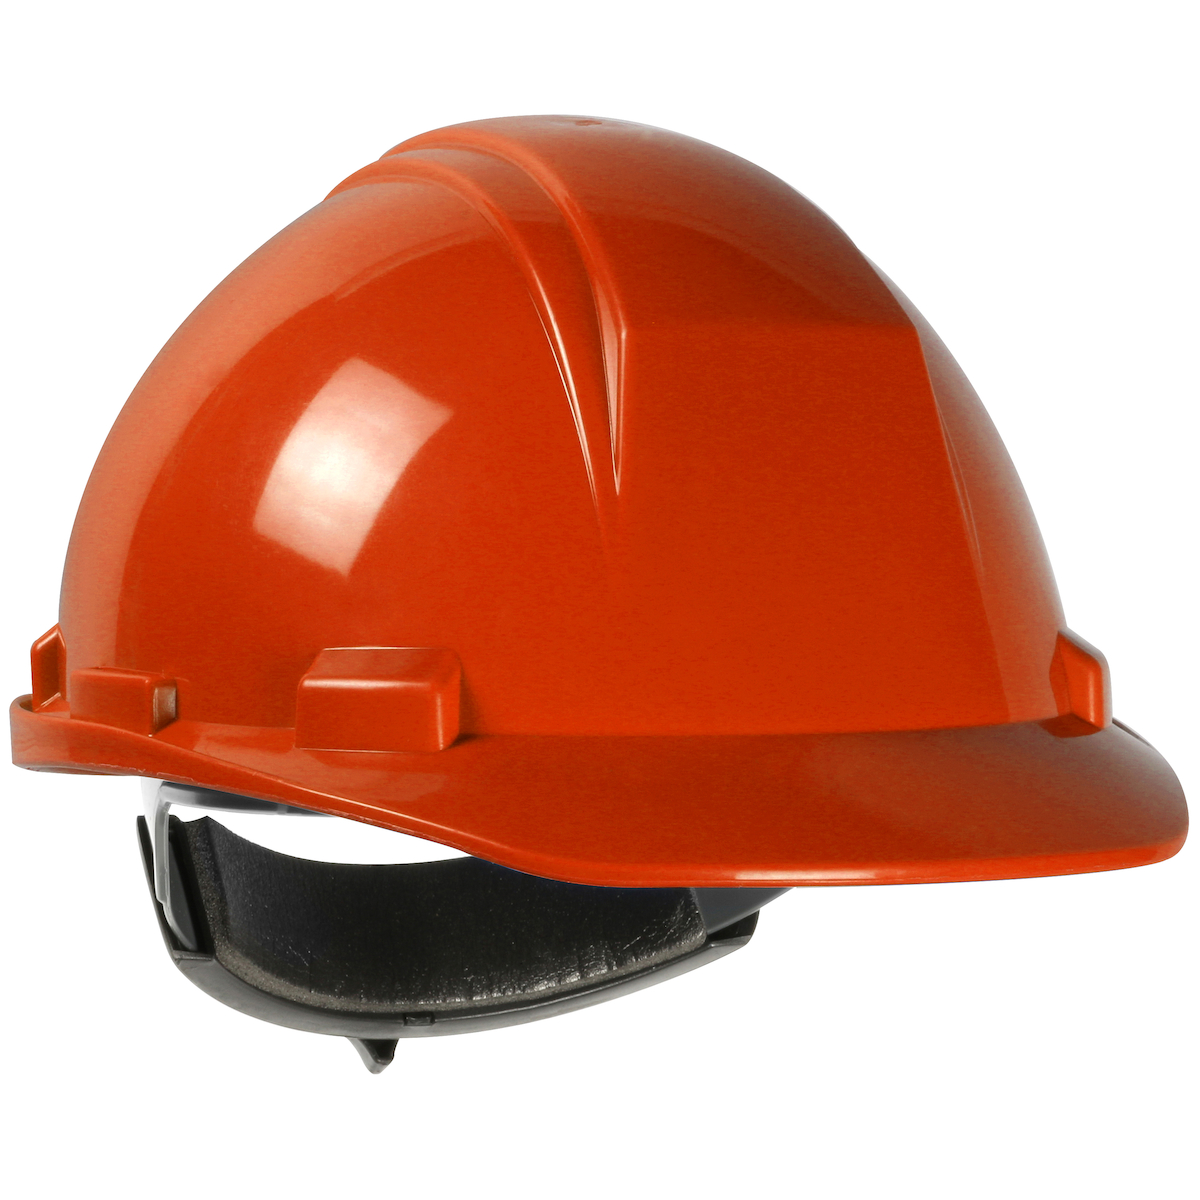 TYPE II, CAP STYLE HARD HAT WITH HDPE SHELL, 4-POINT TEXTILE SUSPENSION AND WHEEL RATCHET ADJUSTMENT